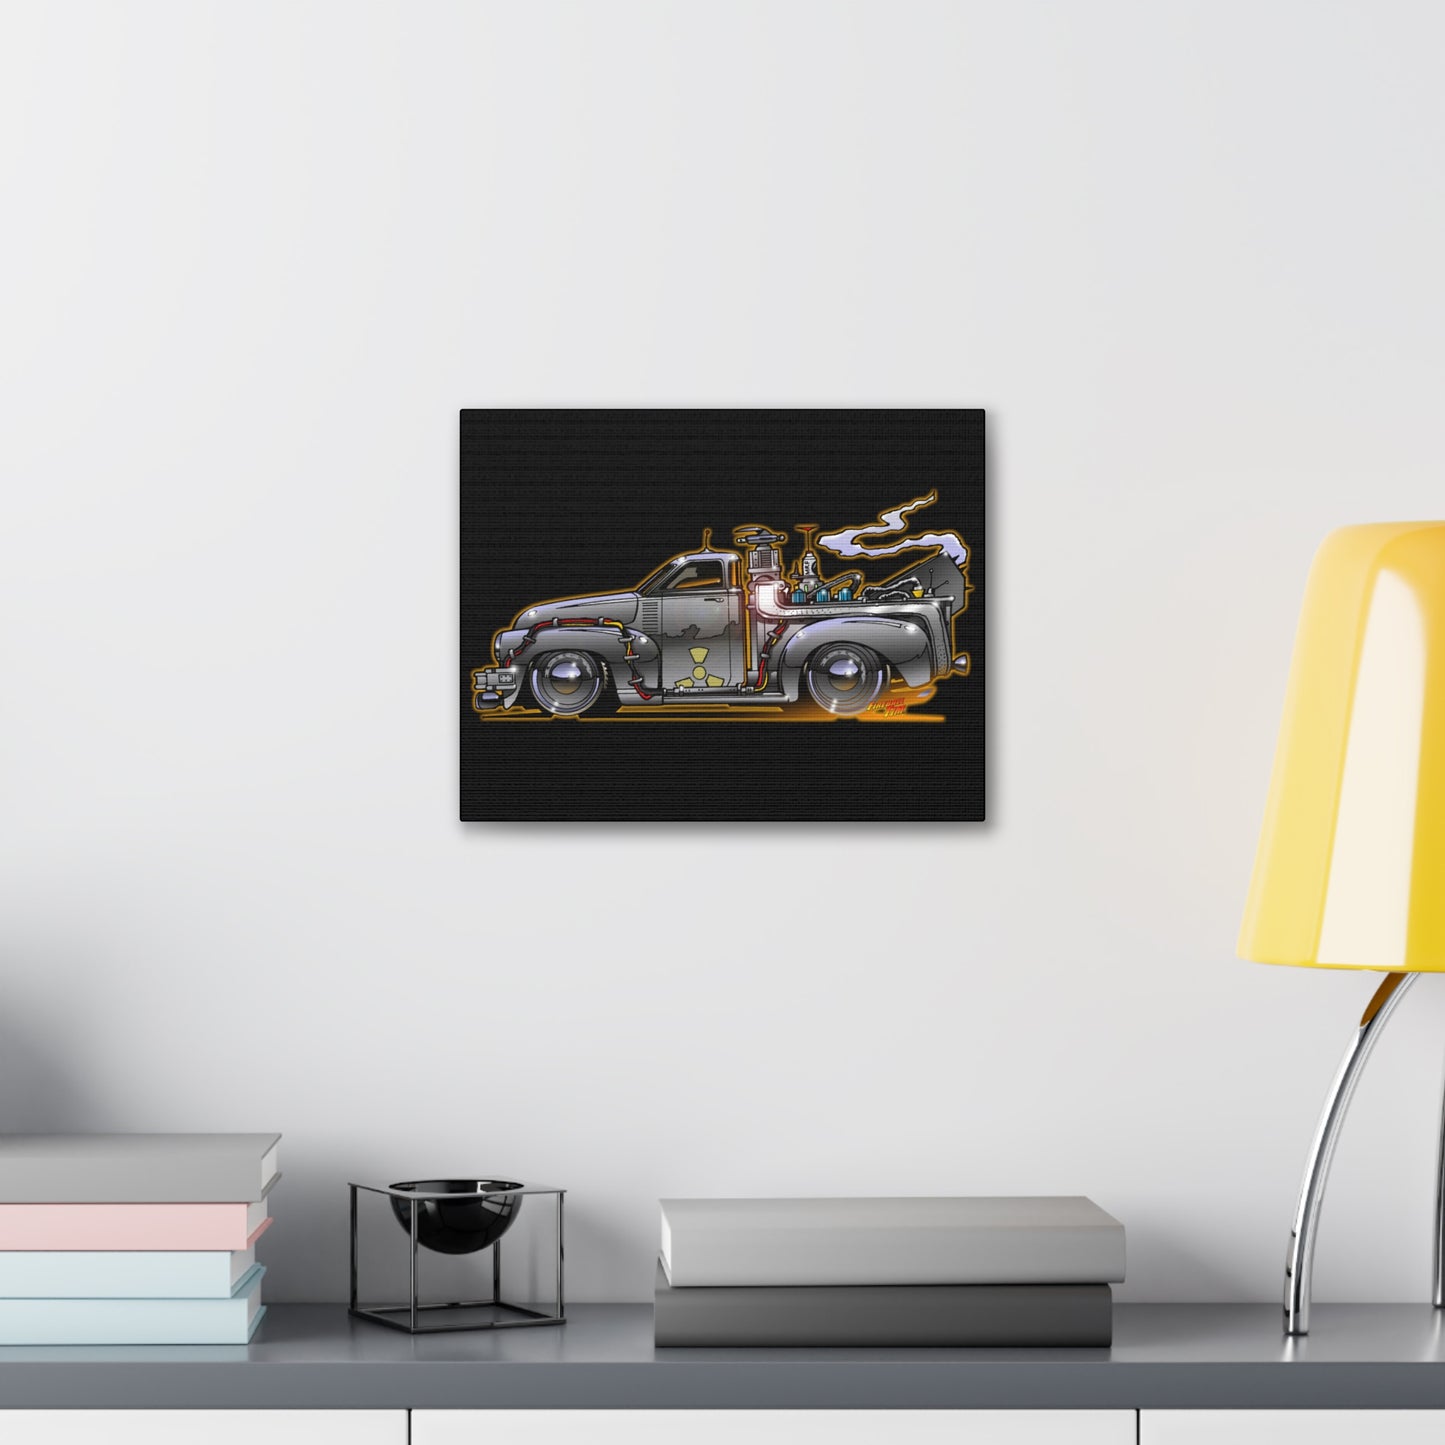 BACK to the FUTURE Chevy 3100 Pickup Time Machine Movie Car Canva Gallery Art Print 11x14